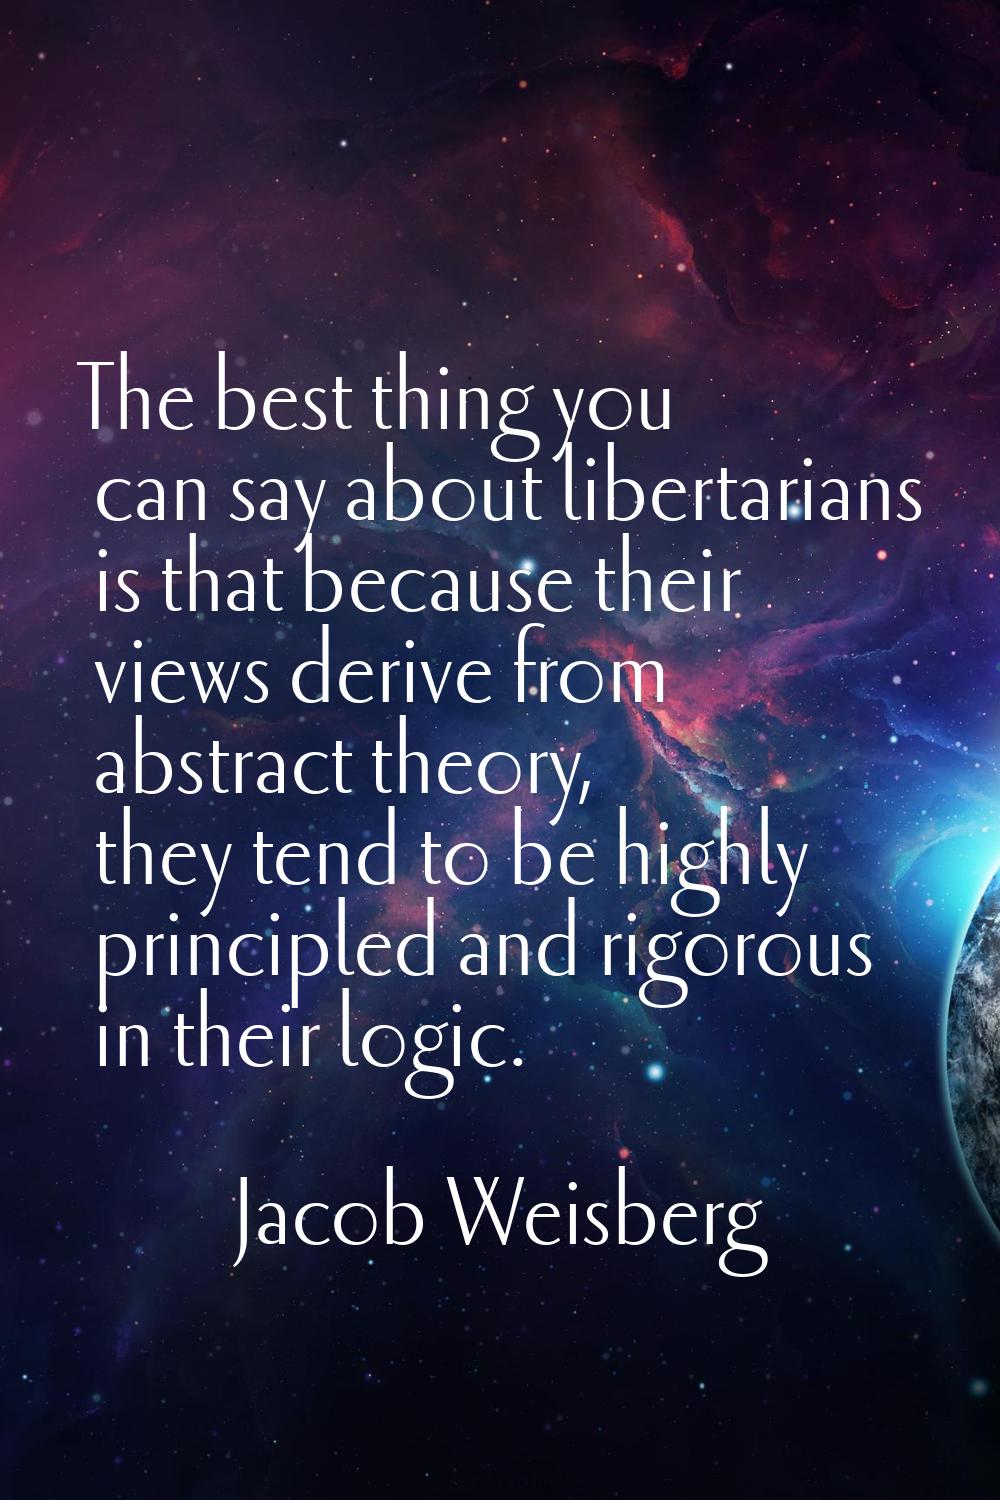 The best thing you can say about libertarians is that because their views derive from abstract theo